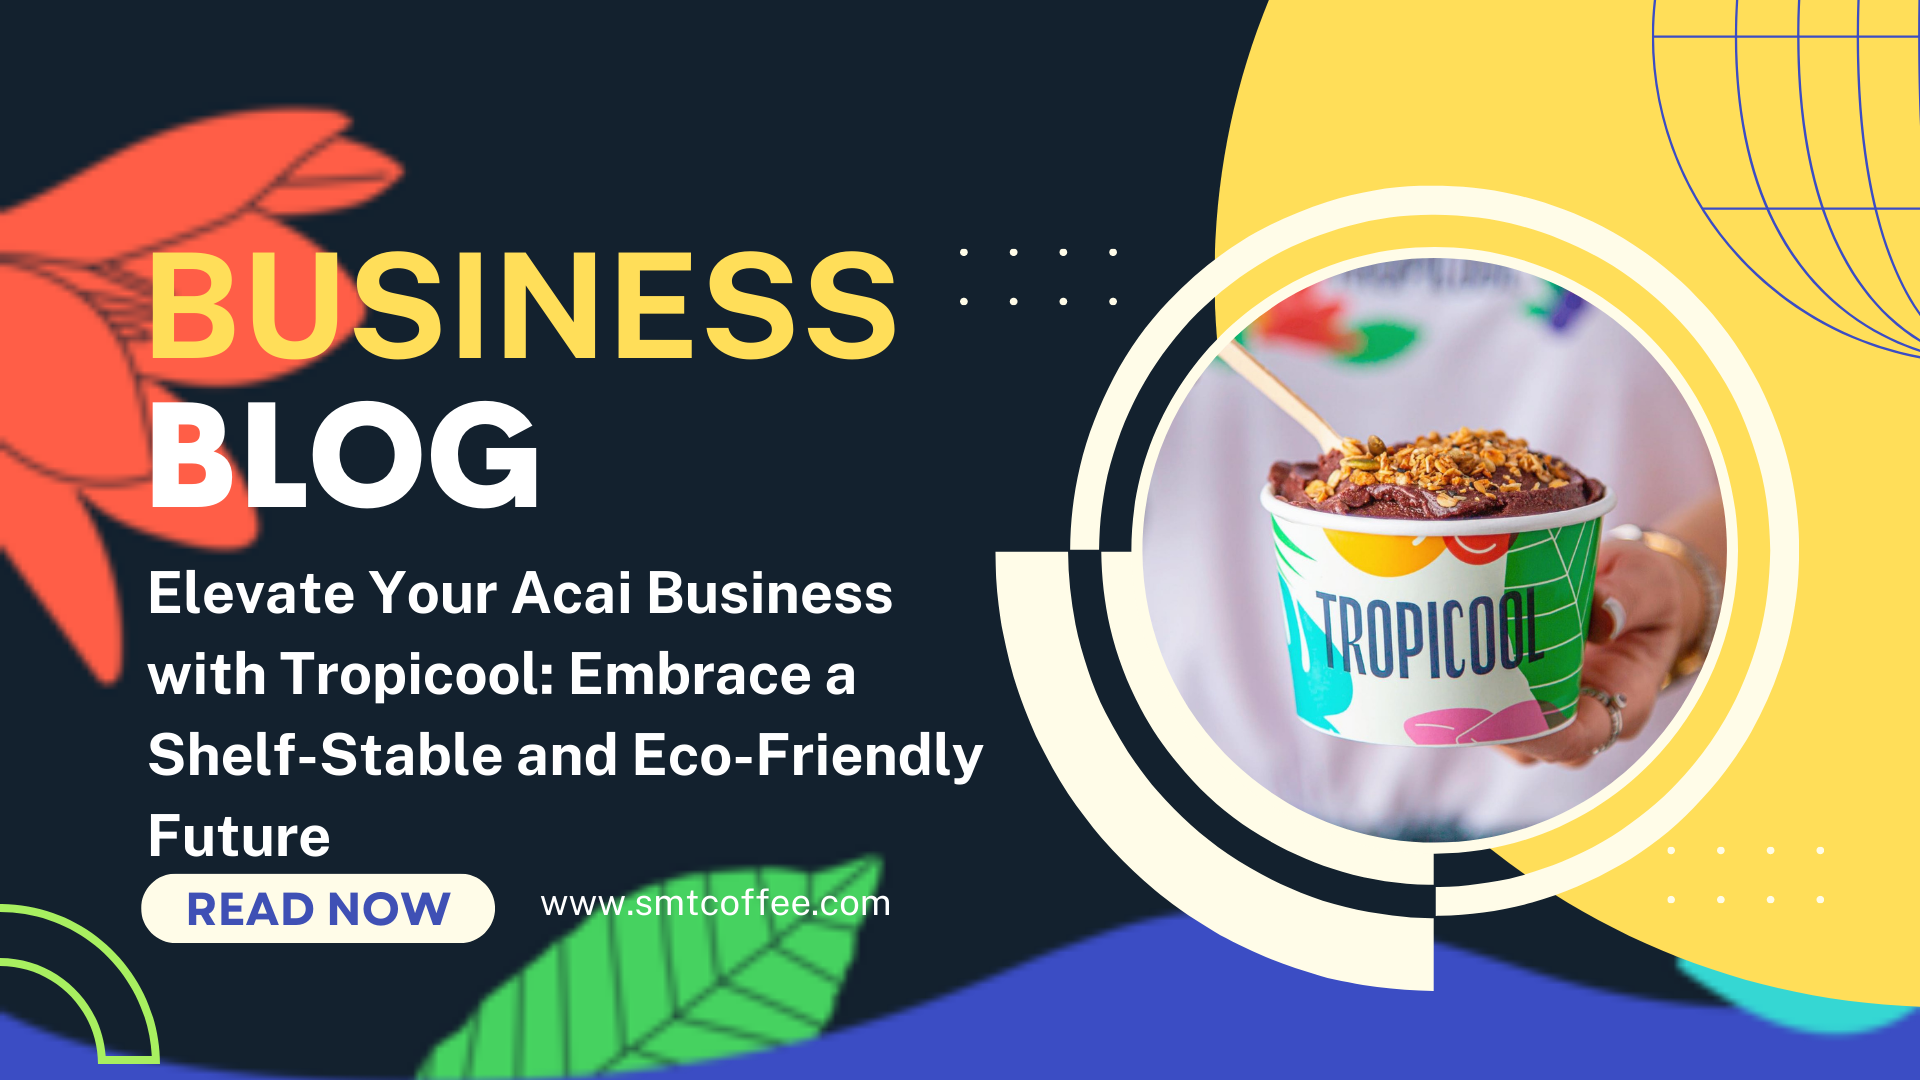 Elevate Your Acai Business with Tropicool: Embrace a Shelf-Stable and Eco-Friendly Future